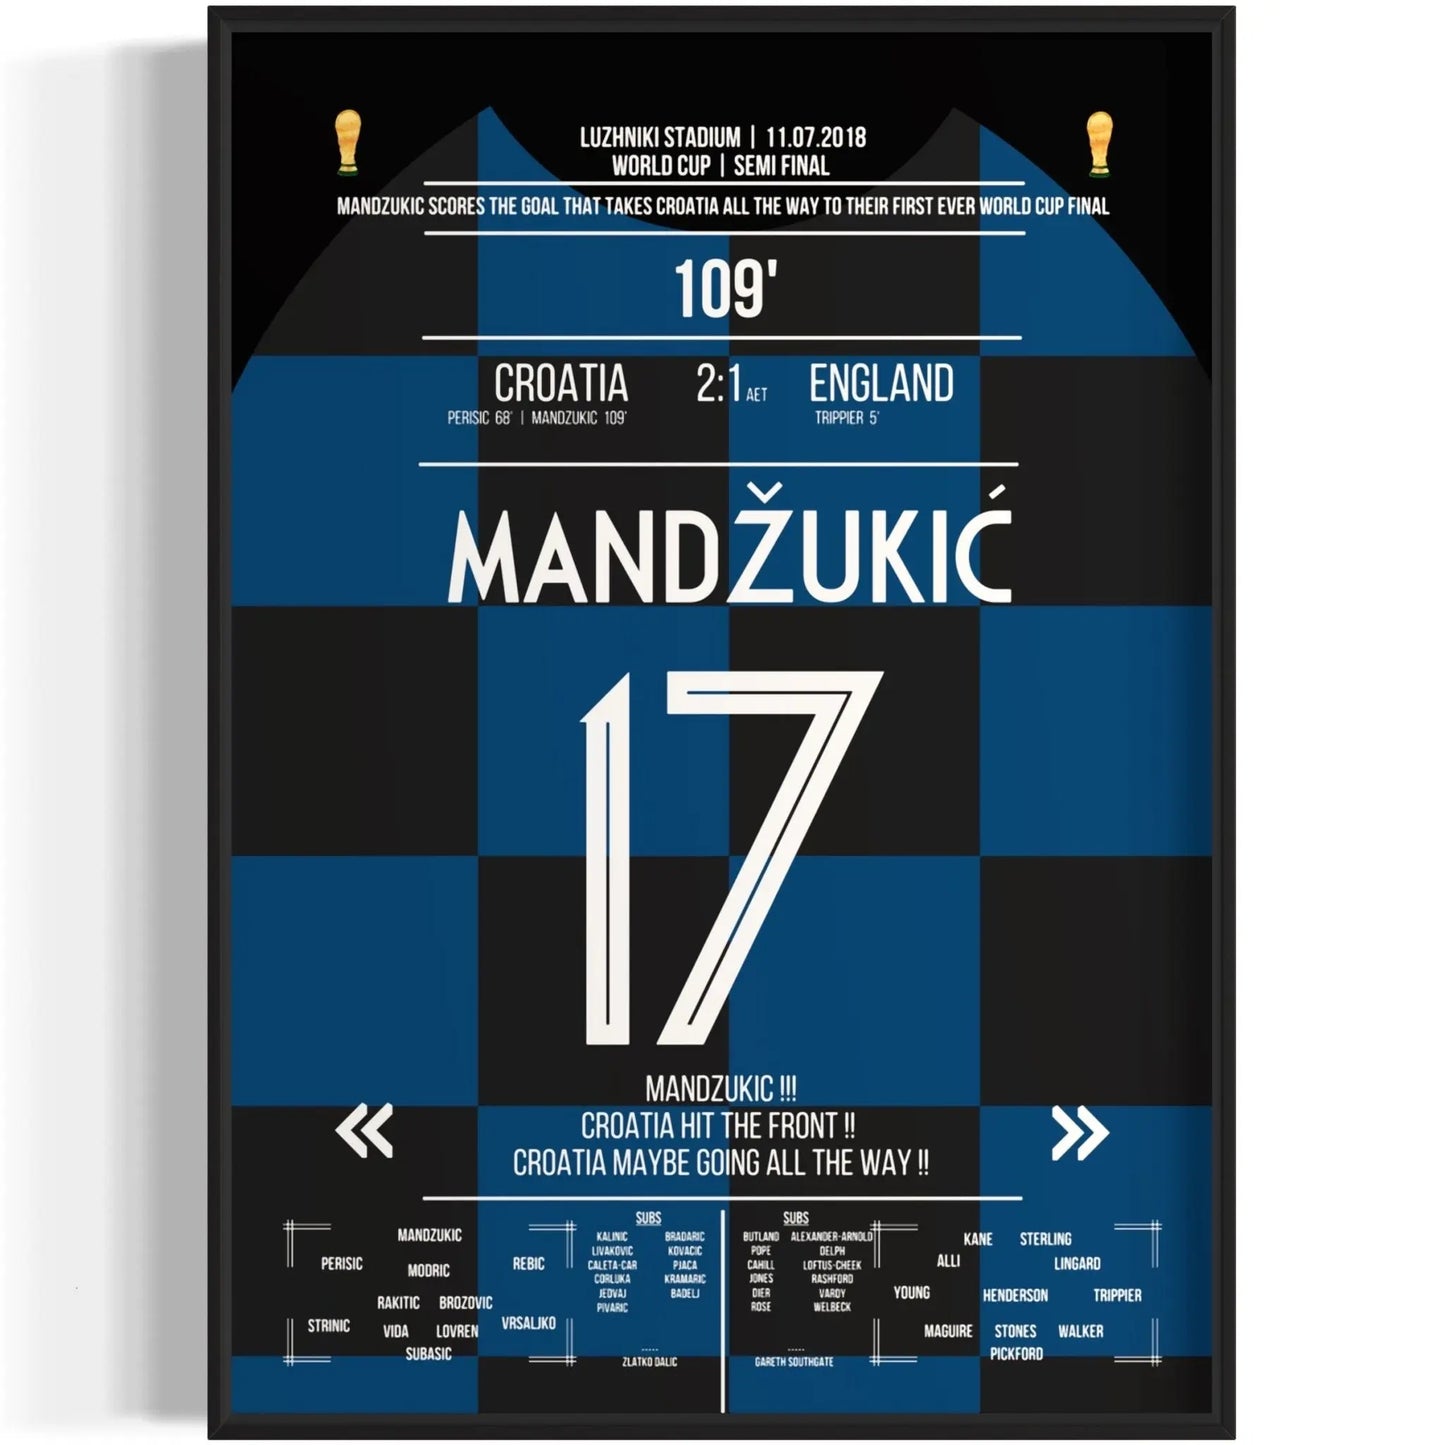 The goal to the World Cup final! Mandzukic fires Croatia to victory against England in 2018